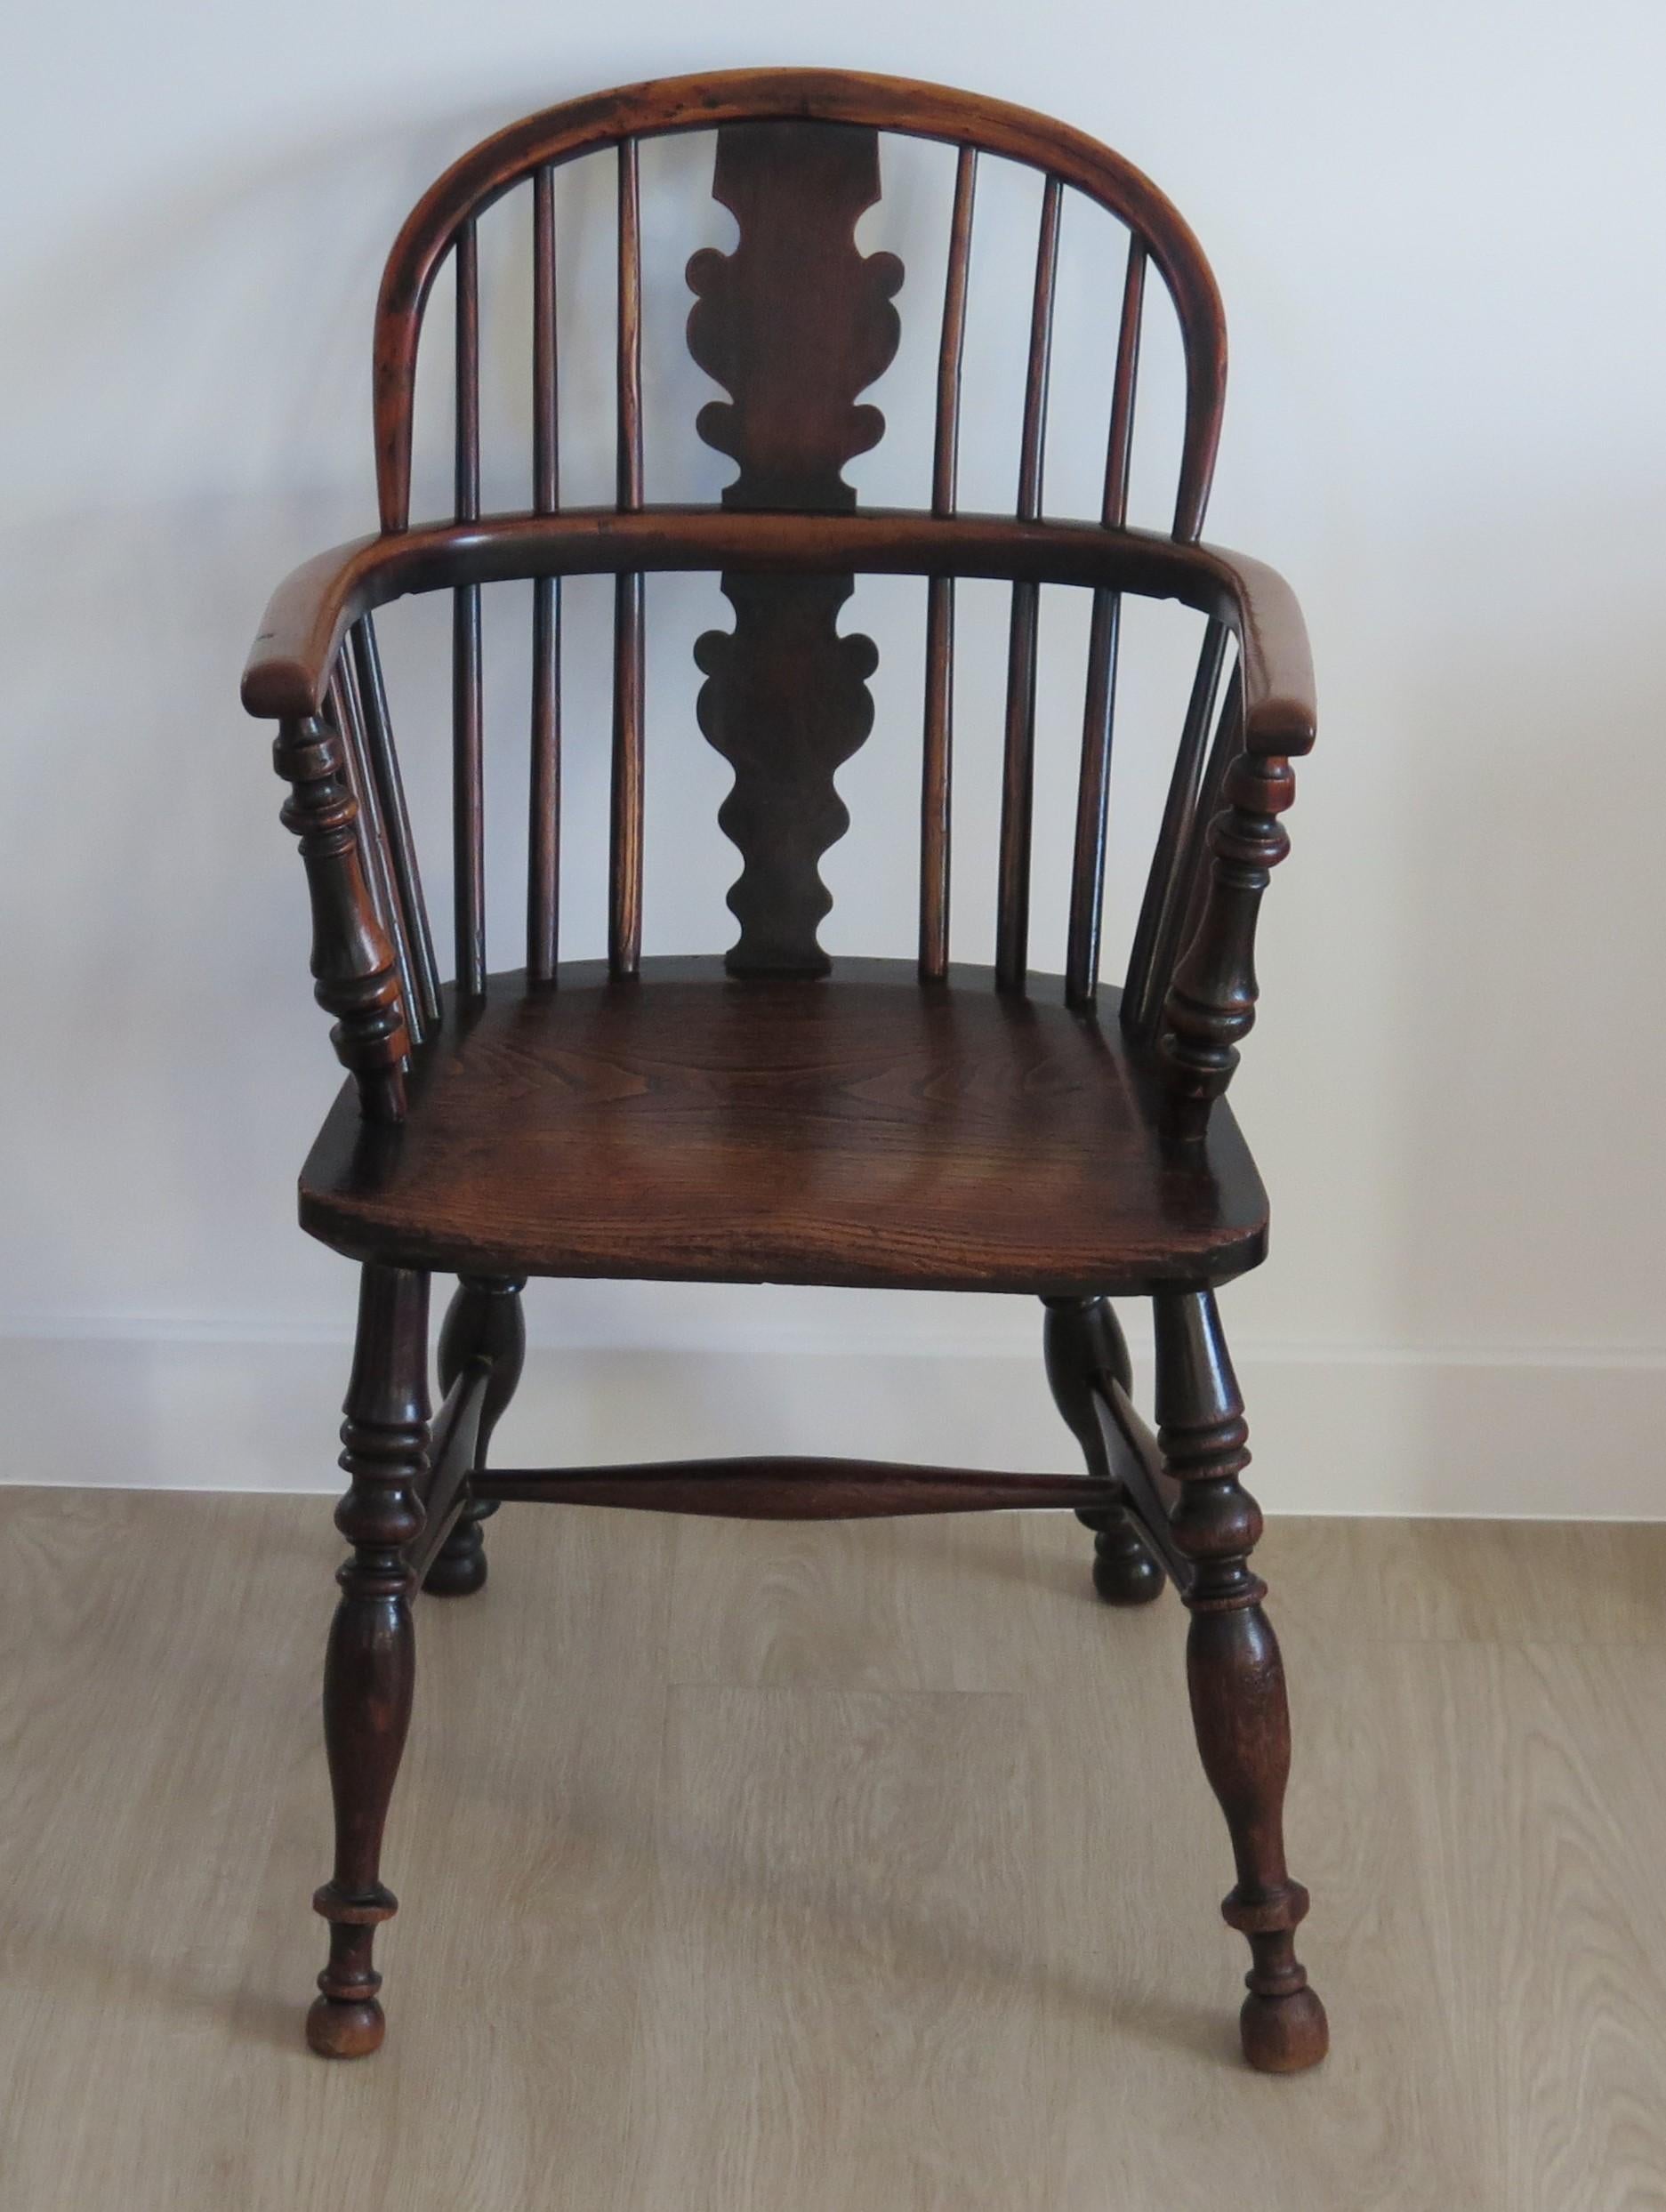 This is a very good quality Country Windsor arm chair with a low back, made in England and attributed to a North east Yorkshire maker, in the mid-19th century, or possibly earlier.

This chair has many good features;
1) Excellent naturally